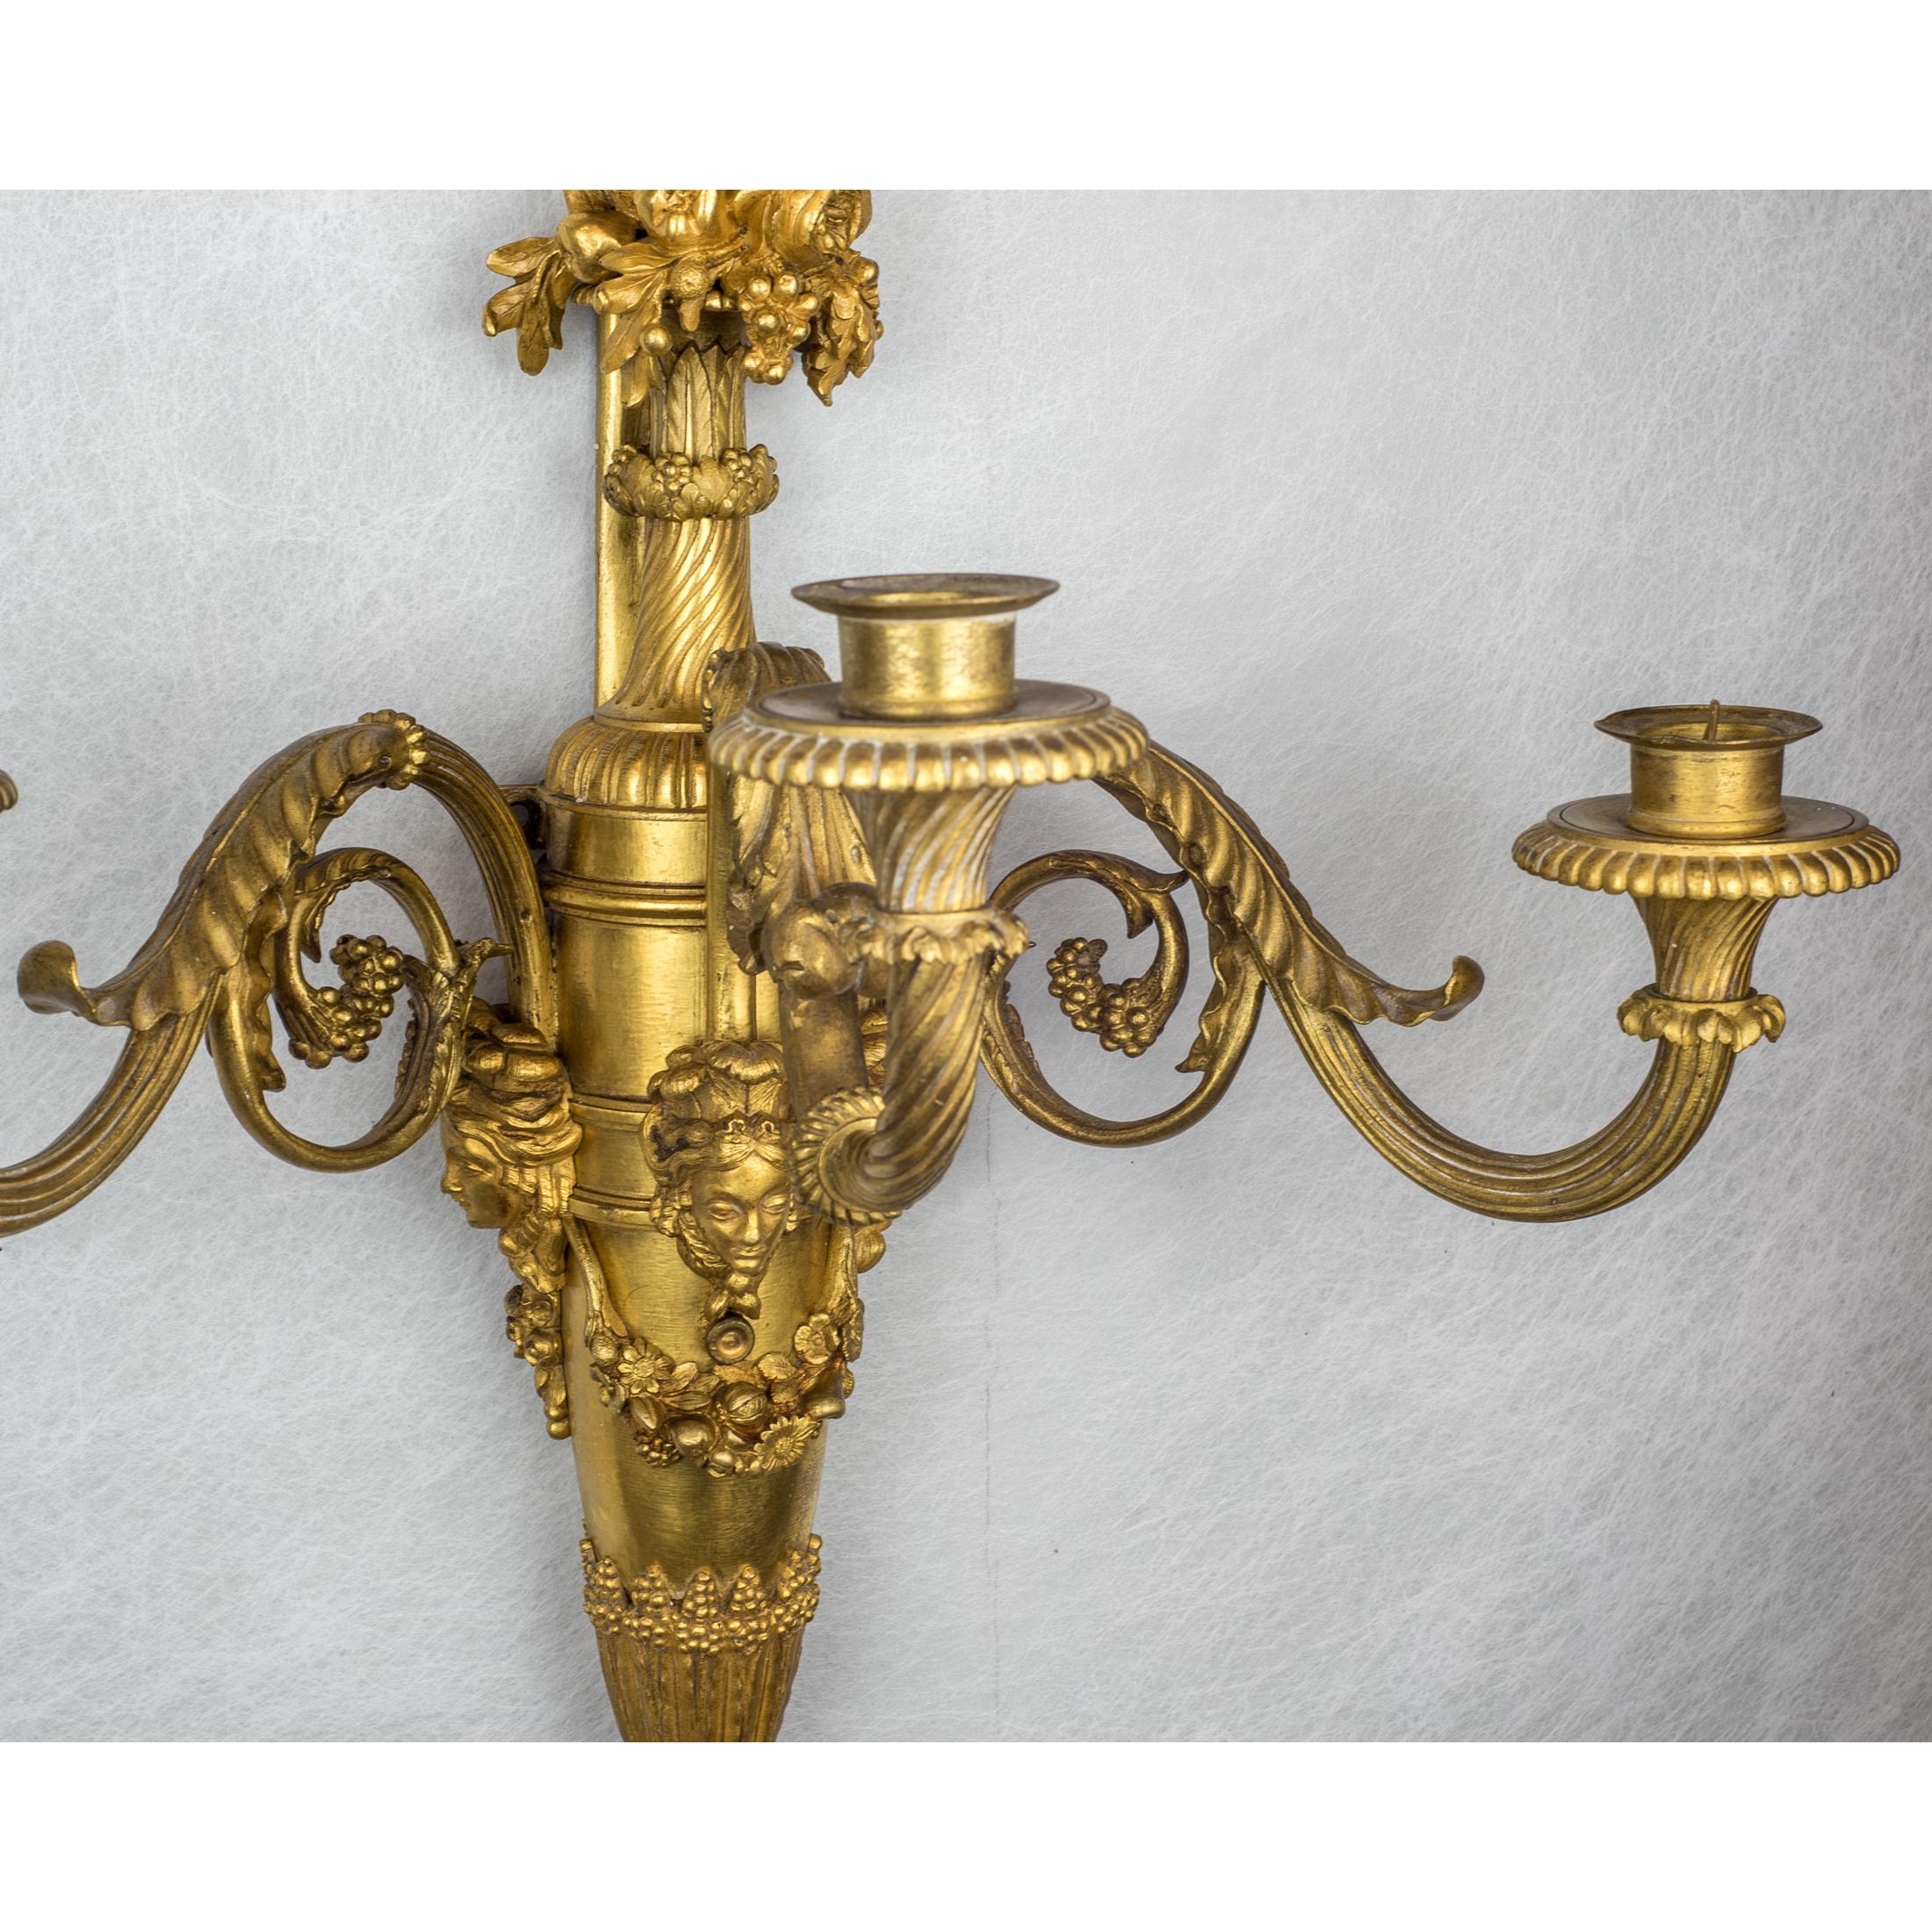 Gilt Large and Fine Pair of Henri Vian French Ormolu Three-Light Wall Light Sconces For Sale